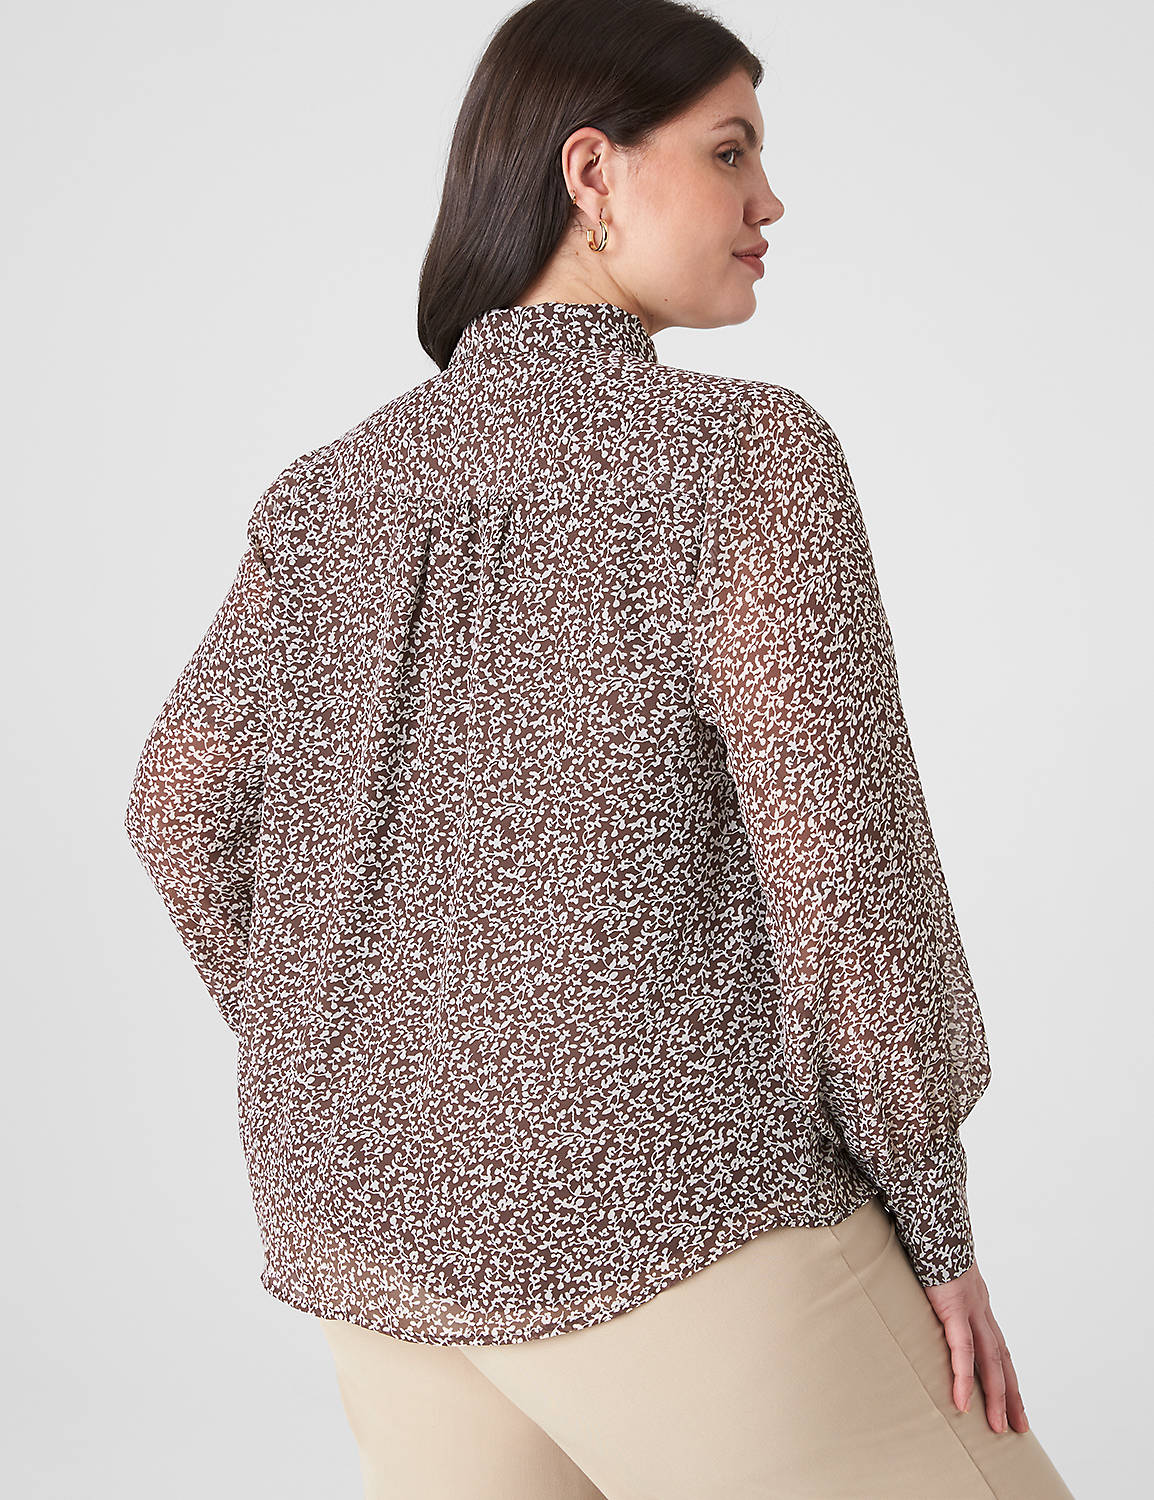 Classic Long Sleeve Collared Placke Product Image 2